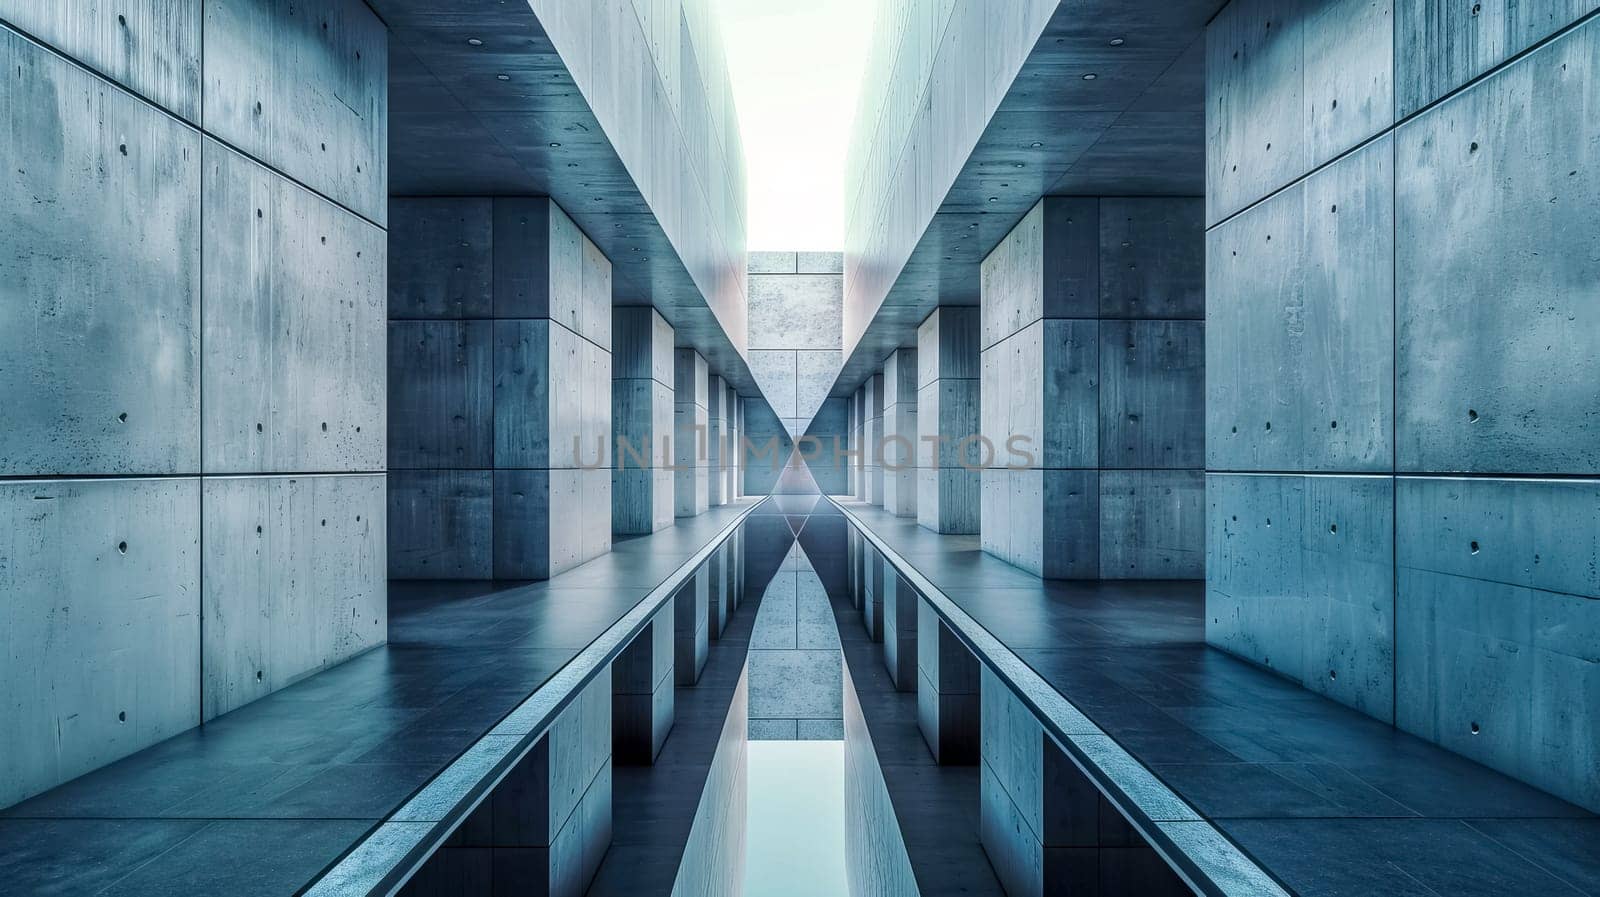 Sleek, symmetrical corridor featuring a minimalist concrete structure with a reflective floor